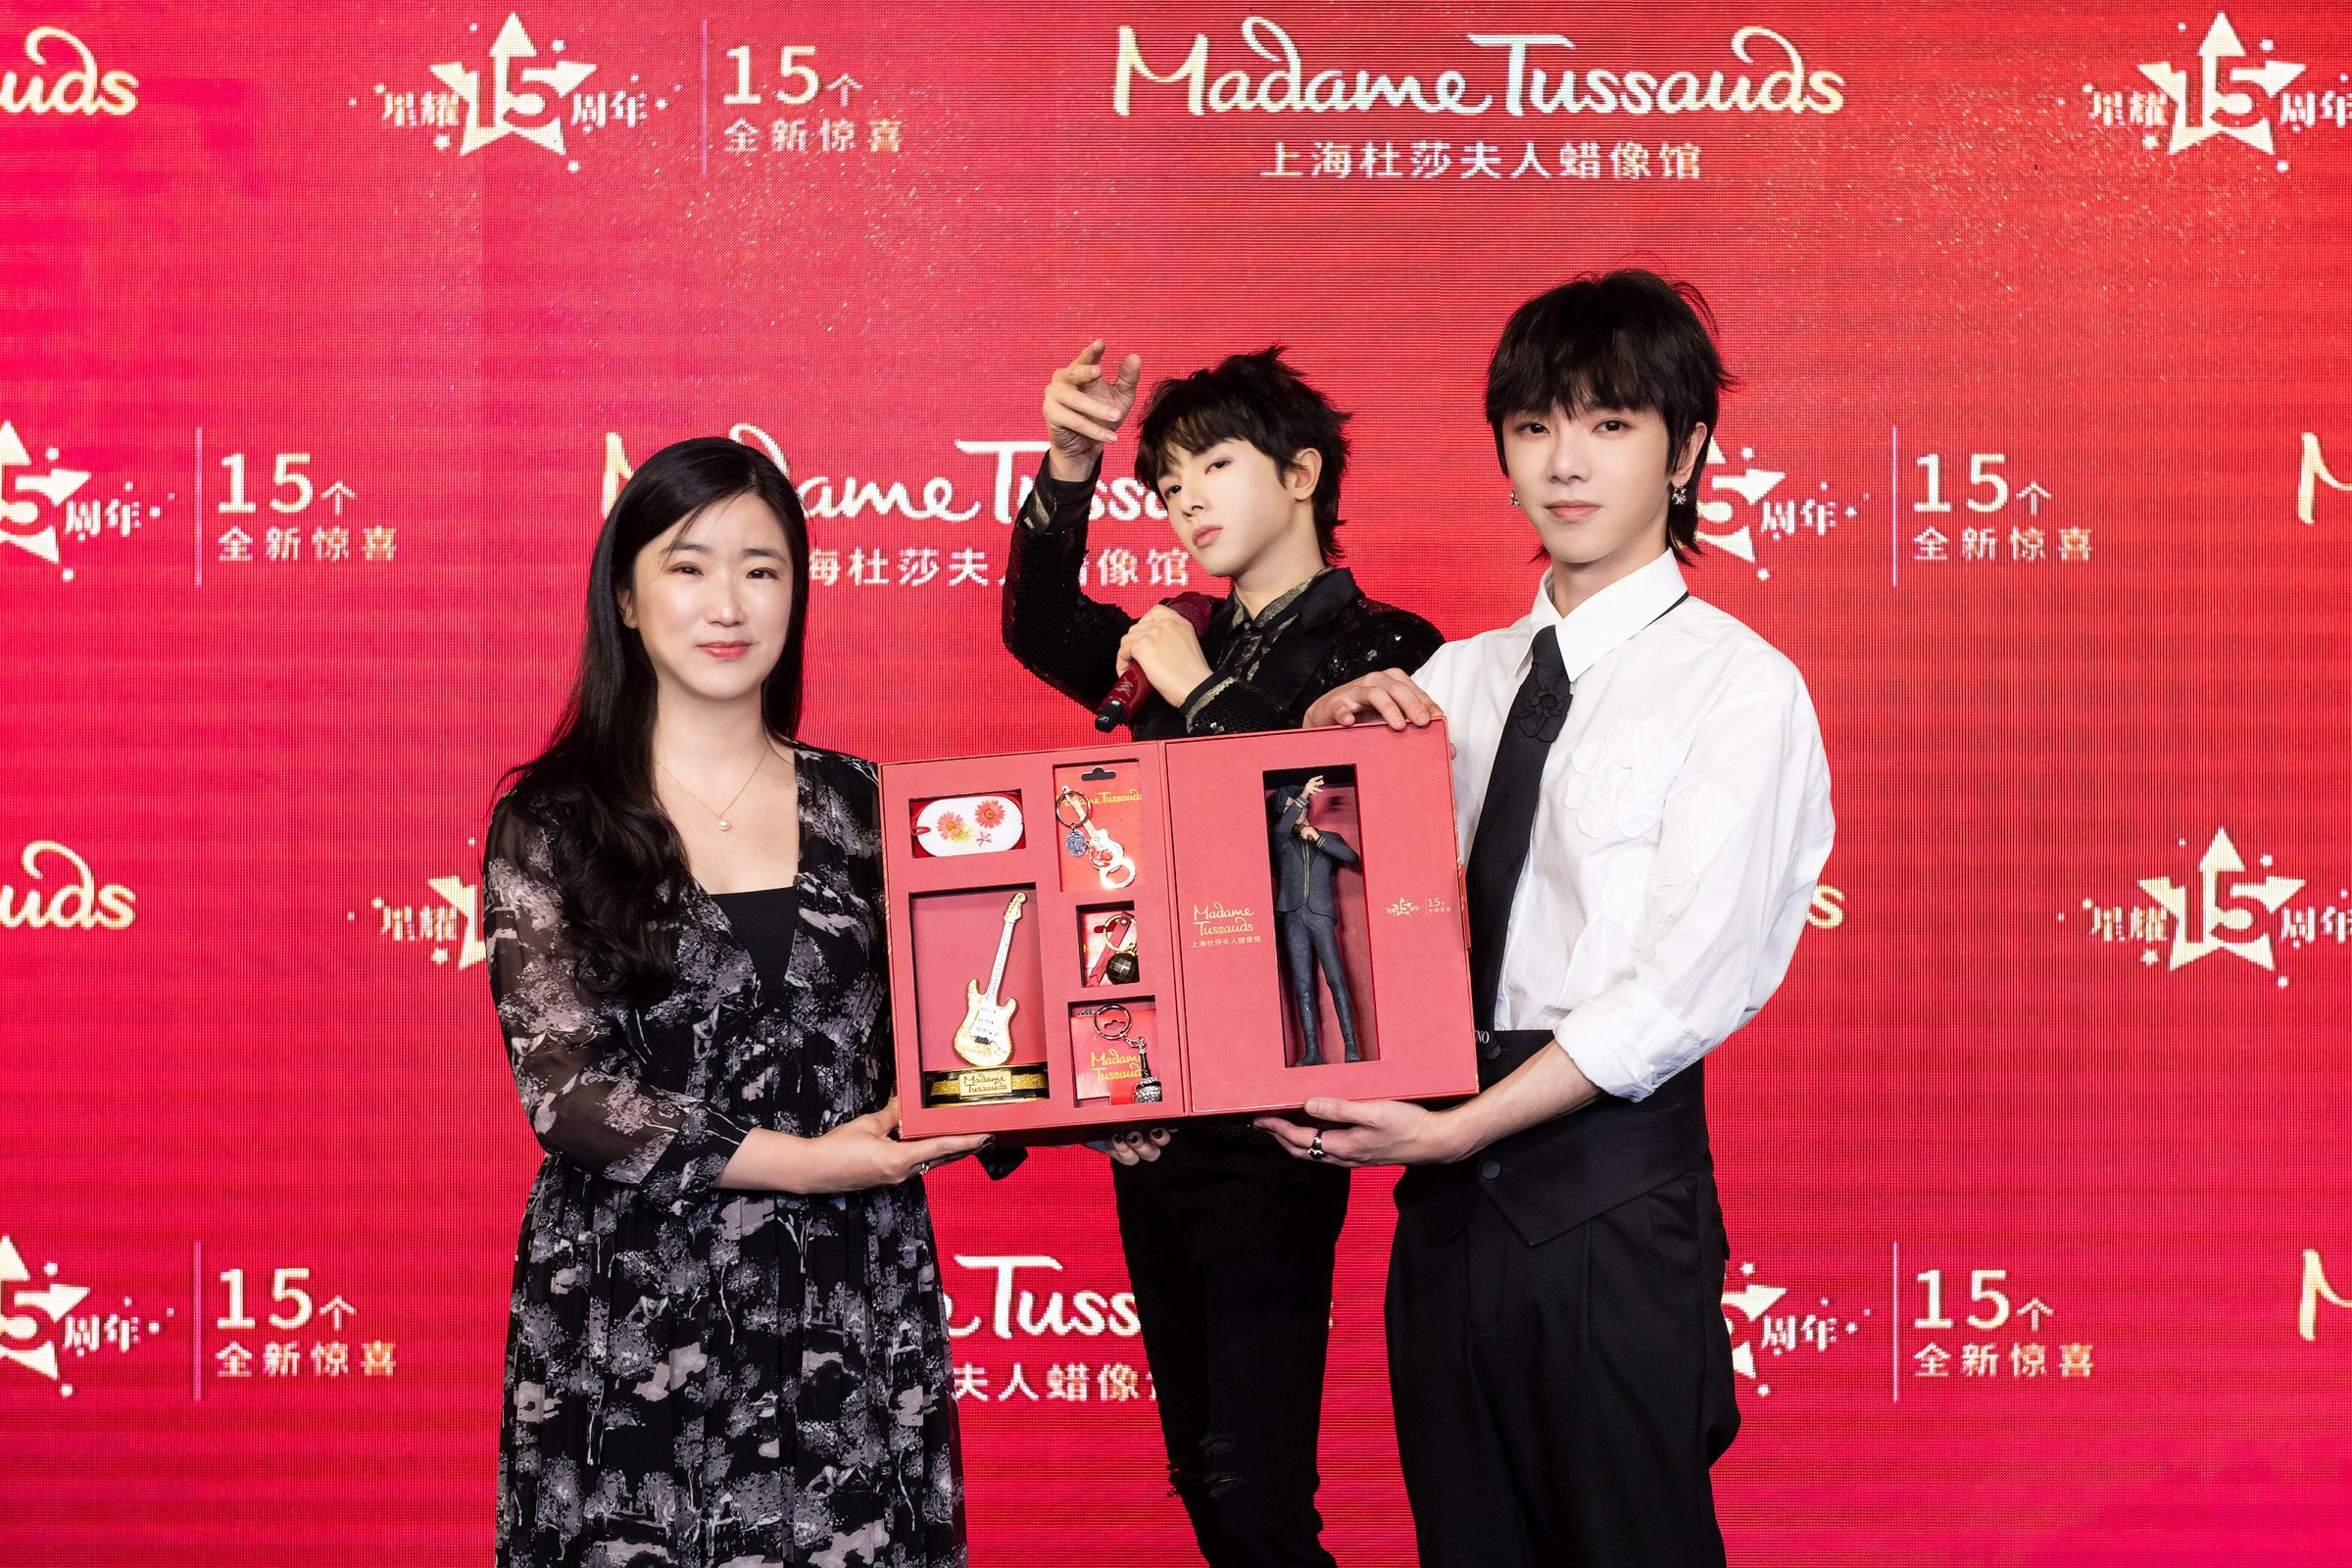 Hua Chenyu appeared at the wax statue unveiling, looking forward to holding a concert this year